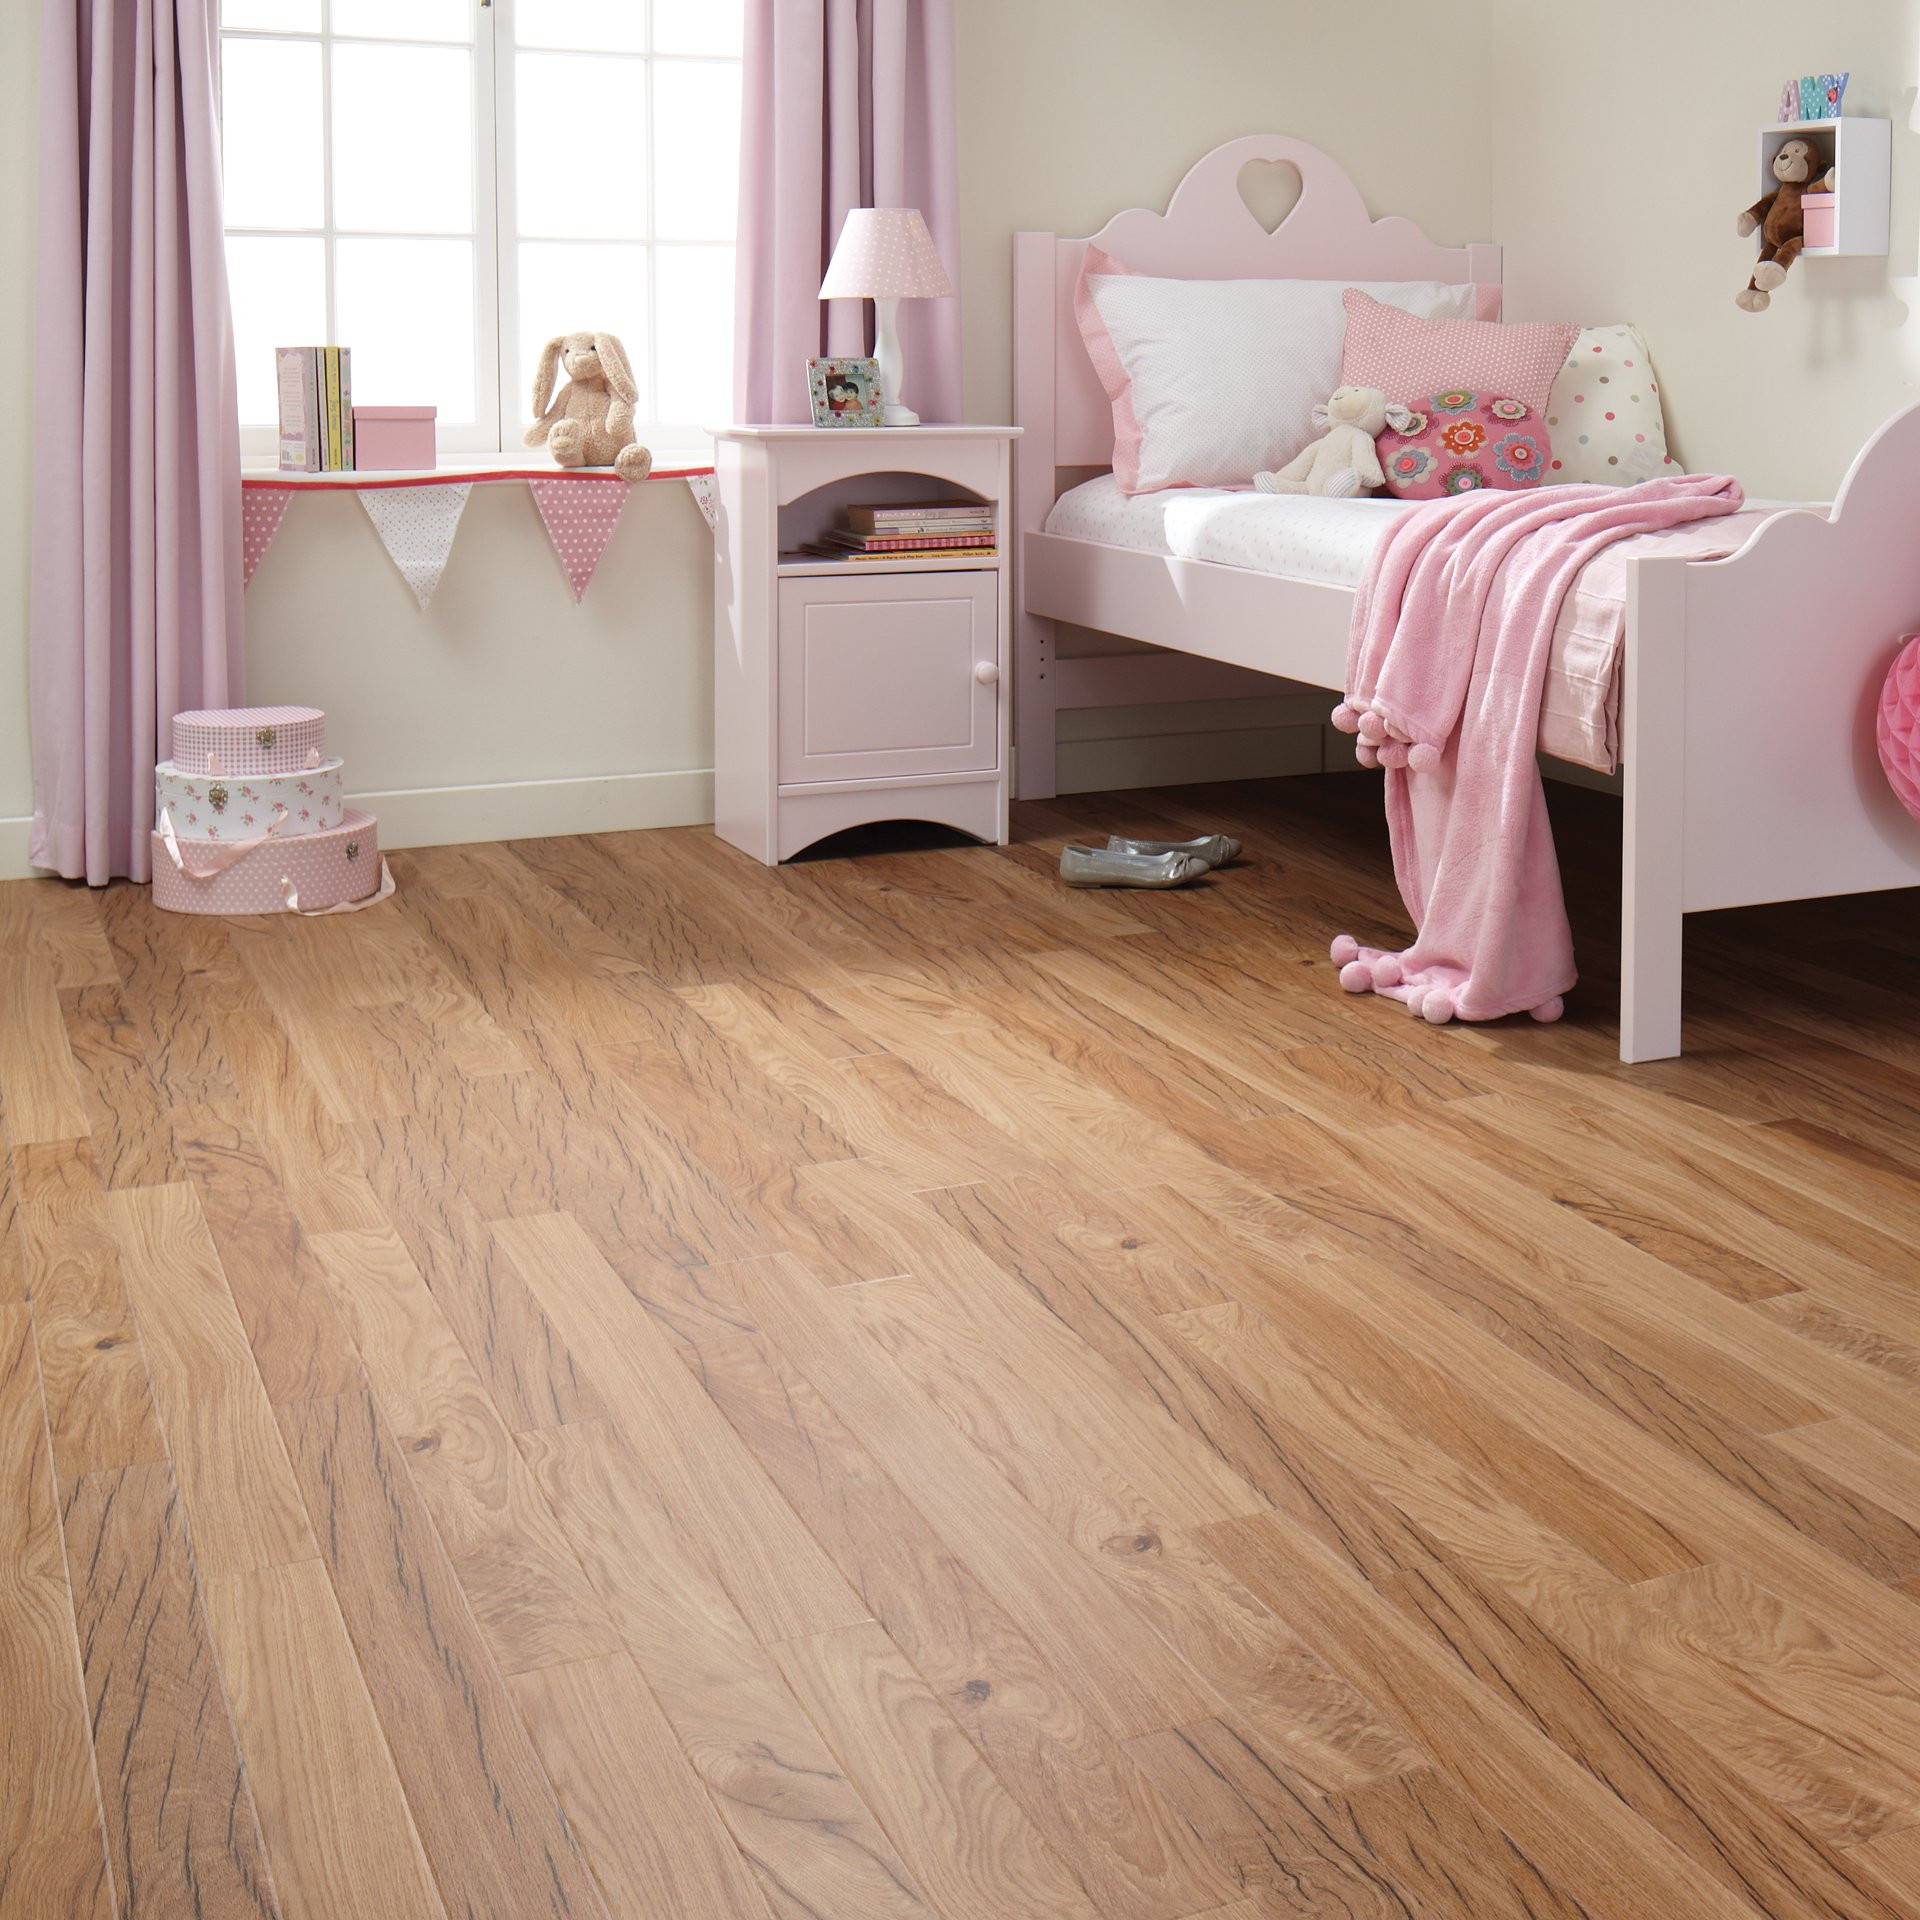 Flooring For Kids Room
 Kids Rooms Flooring Ideas for Your Home